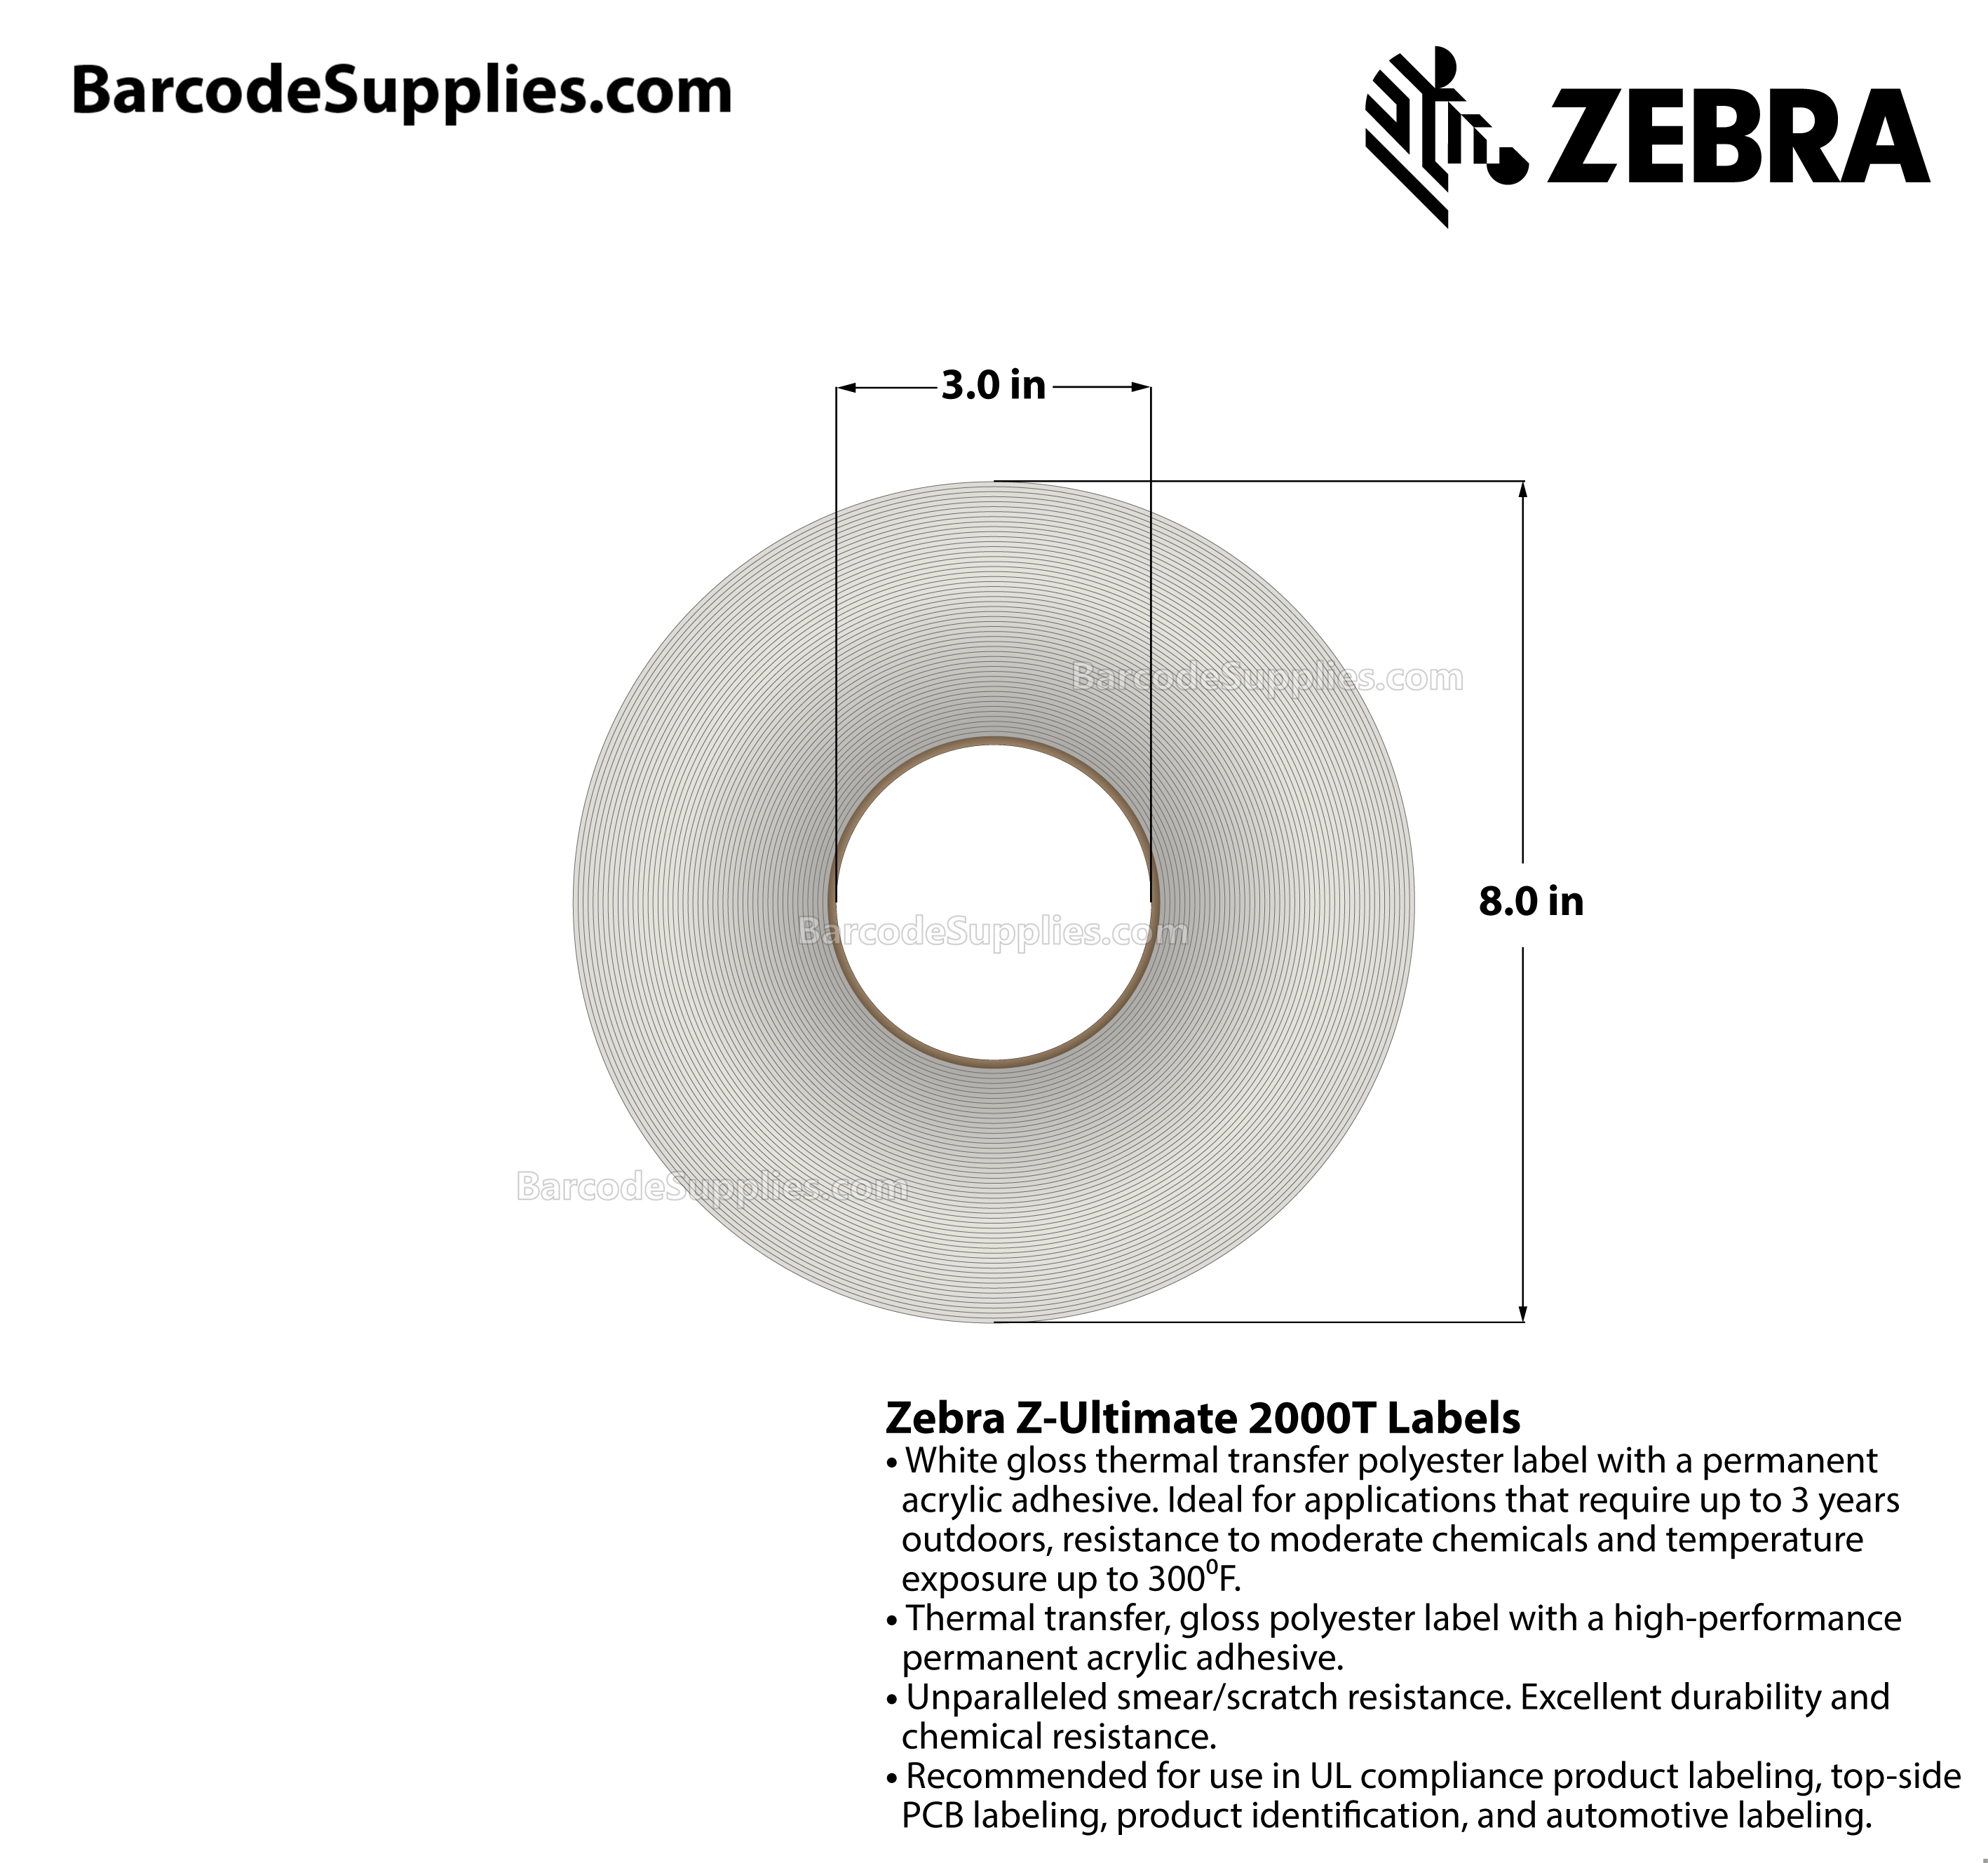 1 x 0.5 Thermal Transfer White Z-Ultimate 2000T Labels With Permanent Adhesive - Perforated - 9420 Labels Per Roll - Carton Of 4 Rolls - 37680 Labels Total - MPN: 10008510